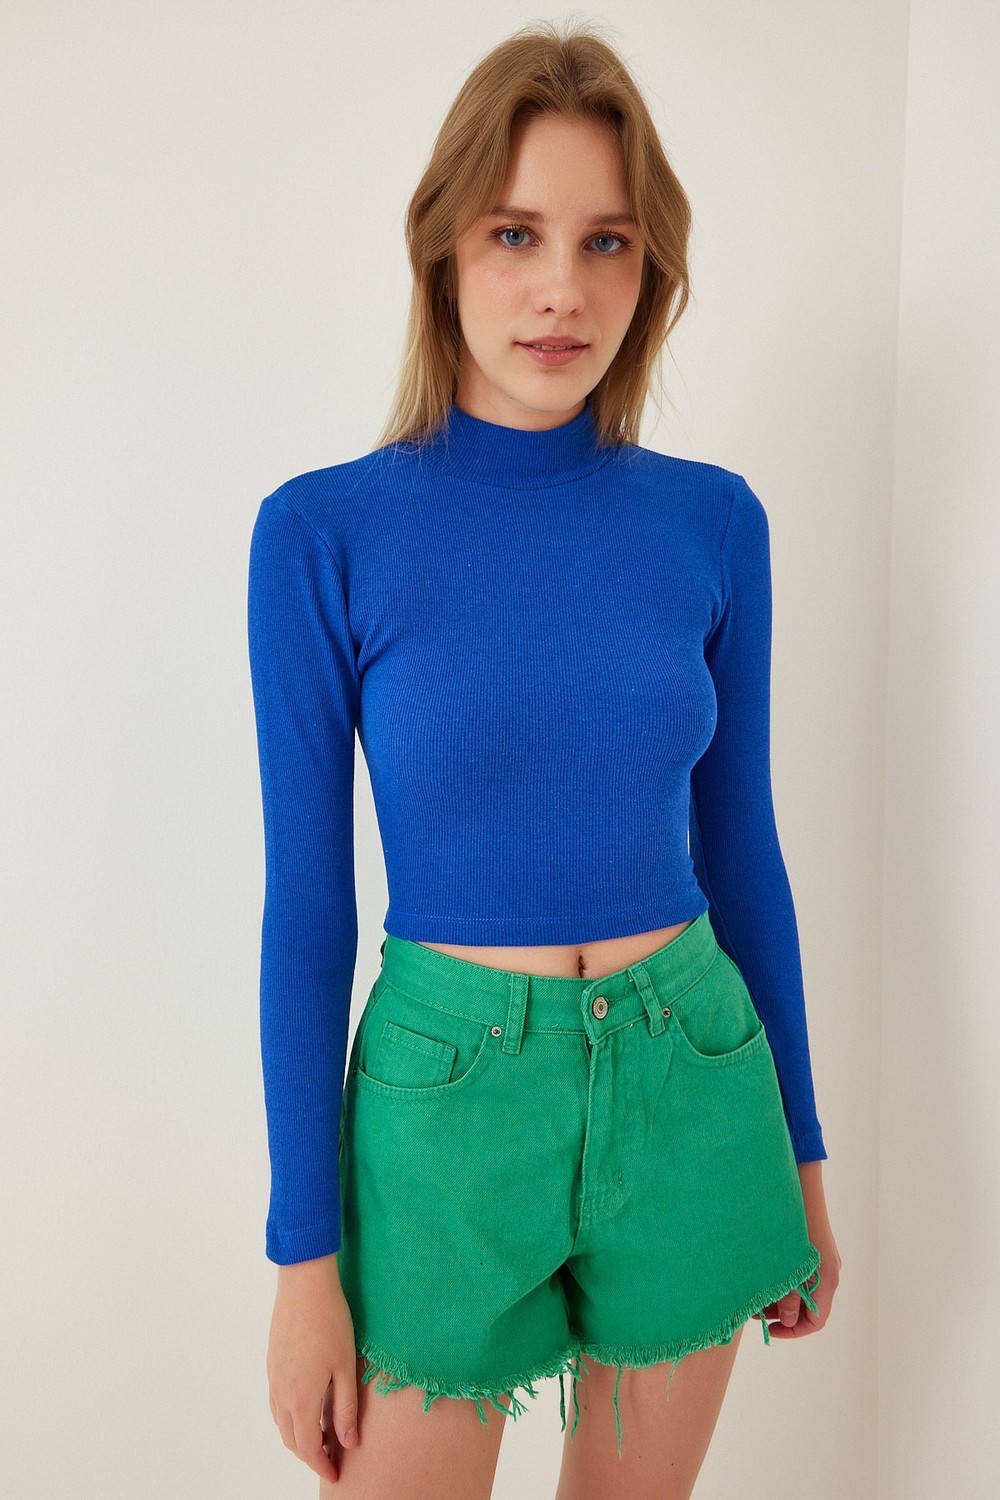 Happiness İstanbul Women's Vibrant Blue Ribbed Turtleneck Crop Knitted Blouse